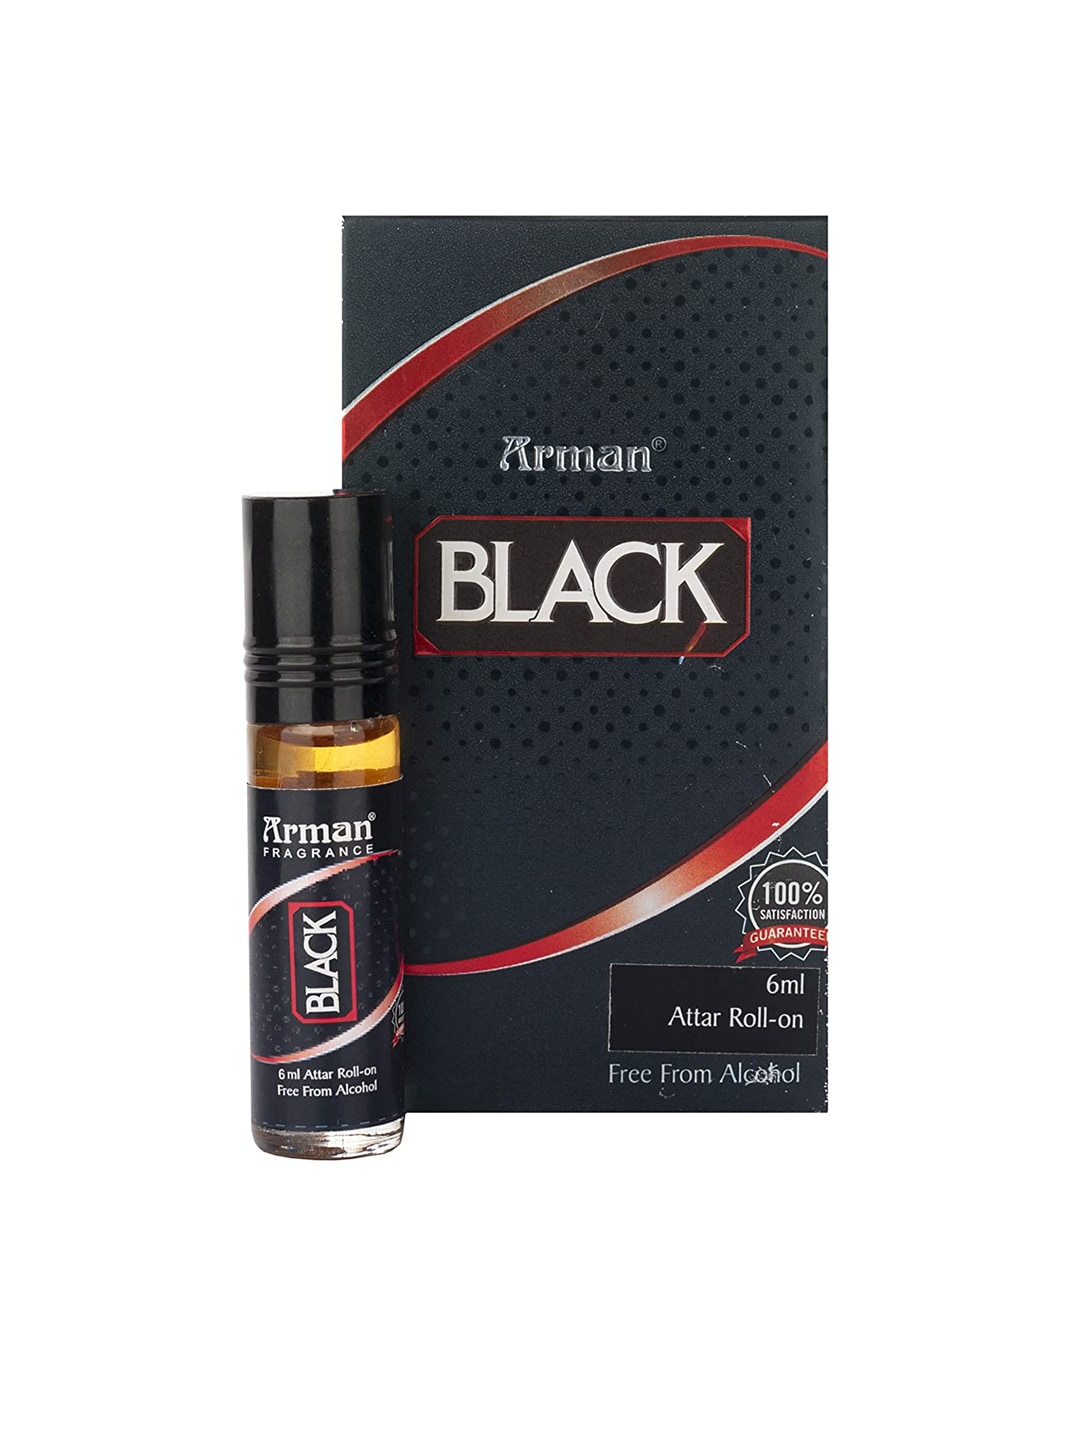 Arman Long Lasting Alcohol Free Black Attar Roll On - 6 ml Price in India